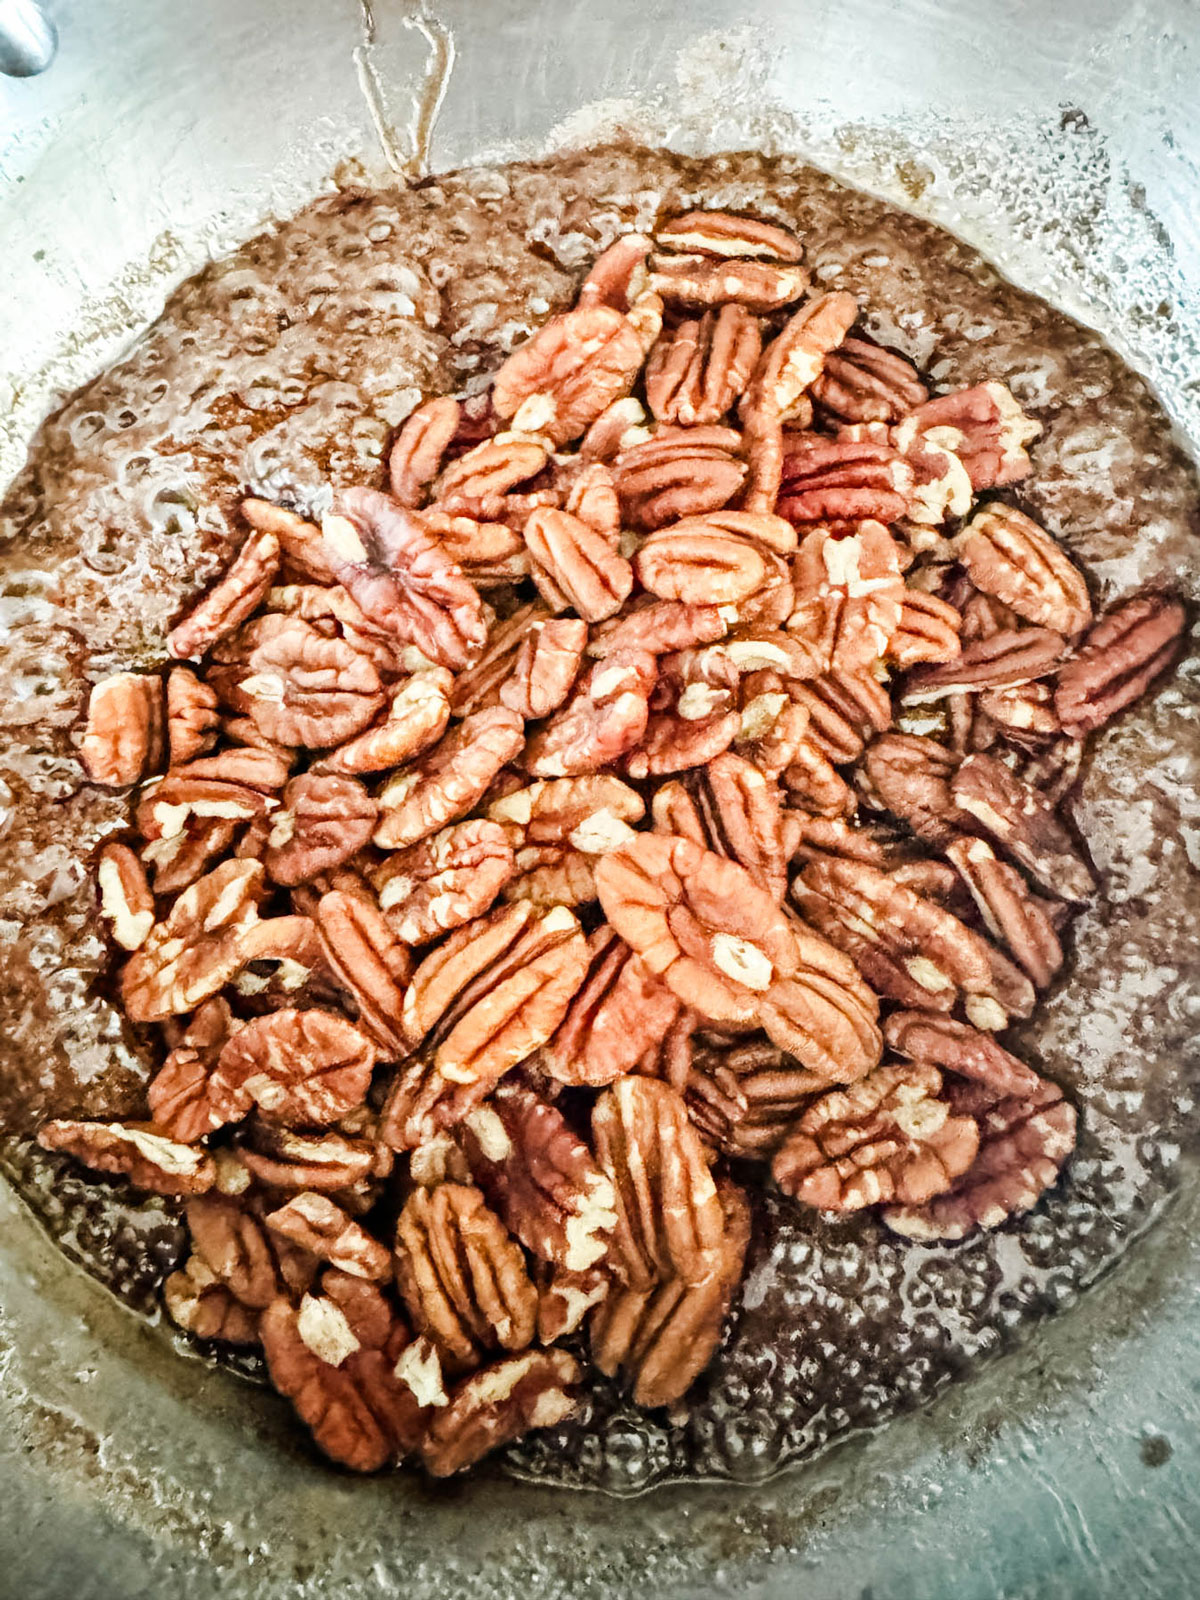 Pecans just added to a spiced sugar mixture in a saucepan.